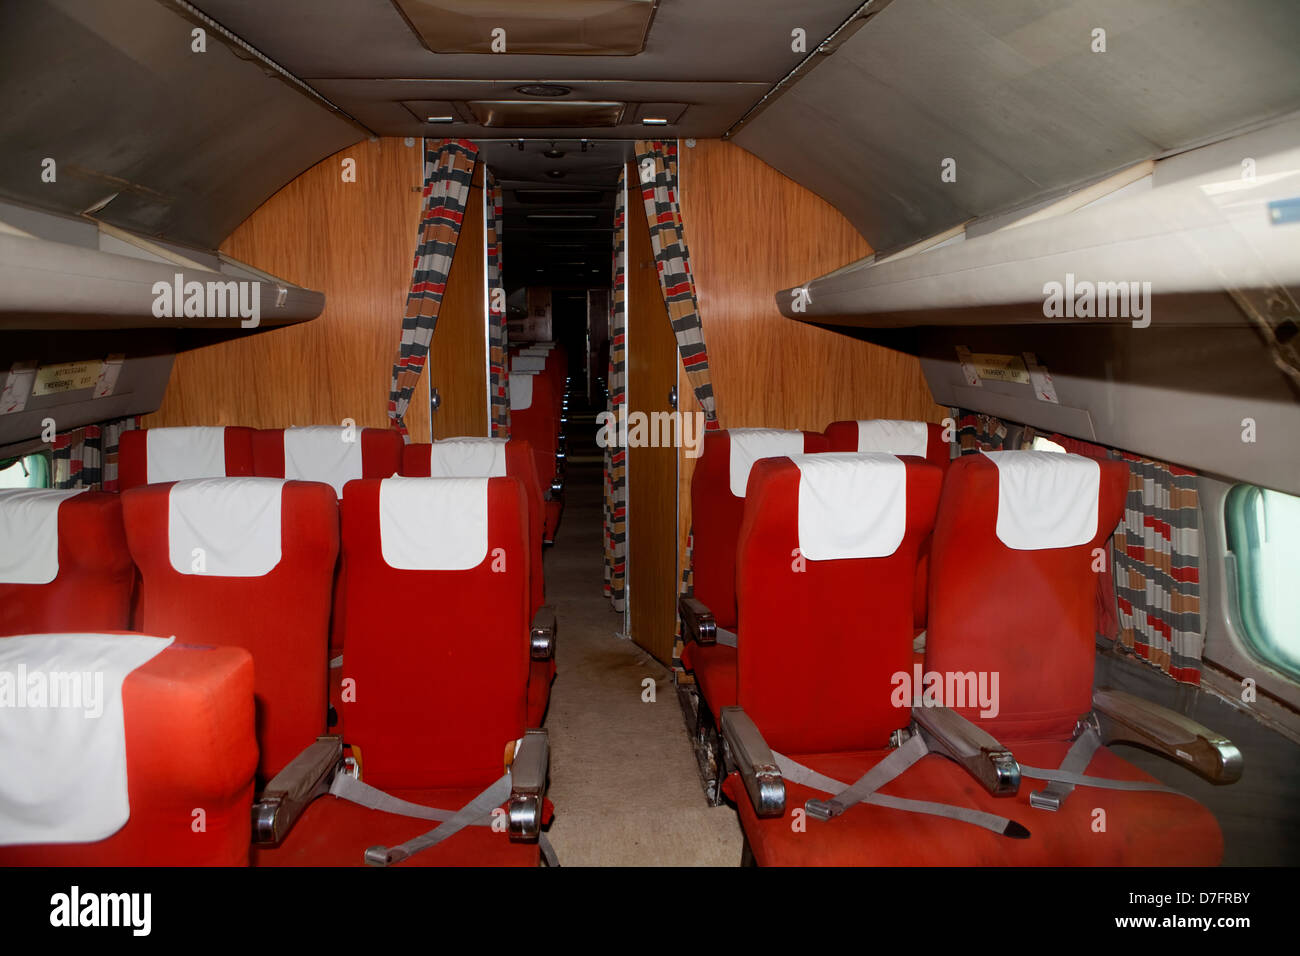 Interior of the passenger aircraft Lockheed Super Constellation or Super  Connie Aircraft Collection Hermeskeil Germany Europe Stock Photo  Alamy